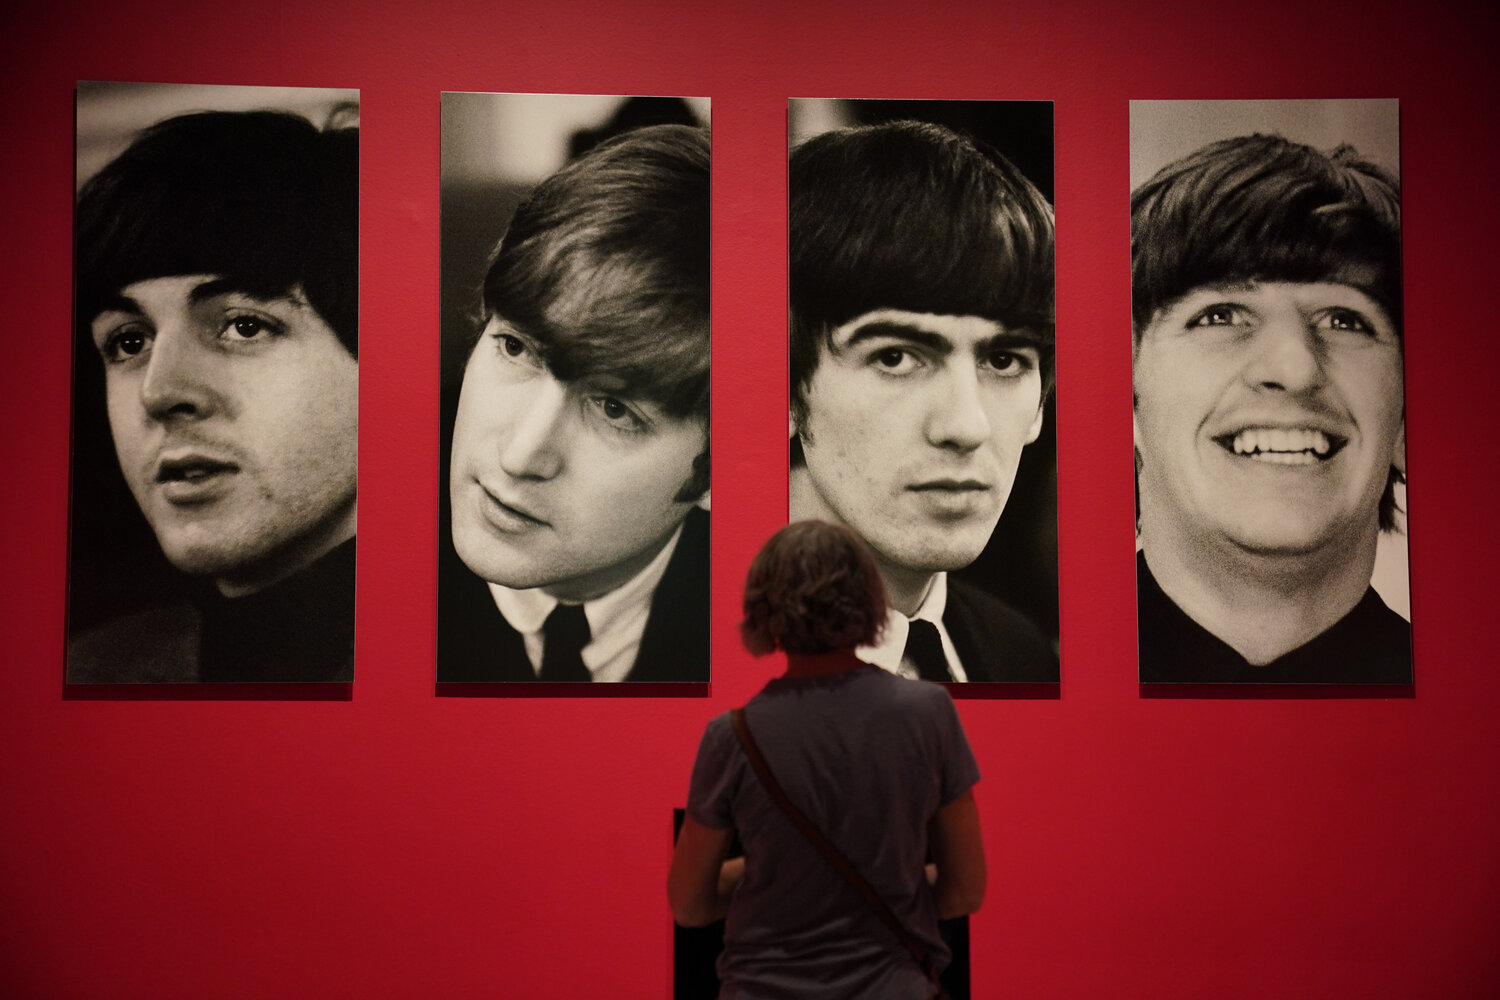 Now and Then might not be the final Beatles song after all, according to Peter Jackson